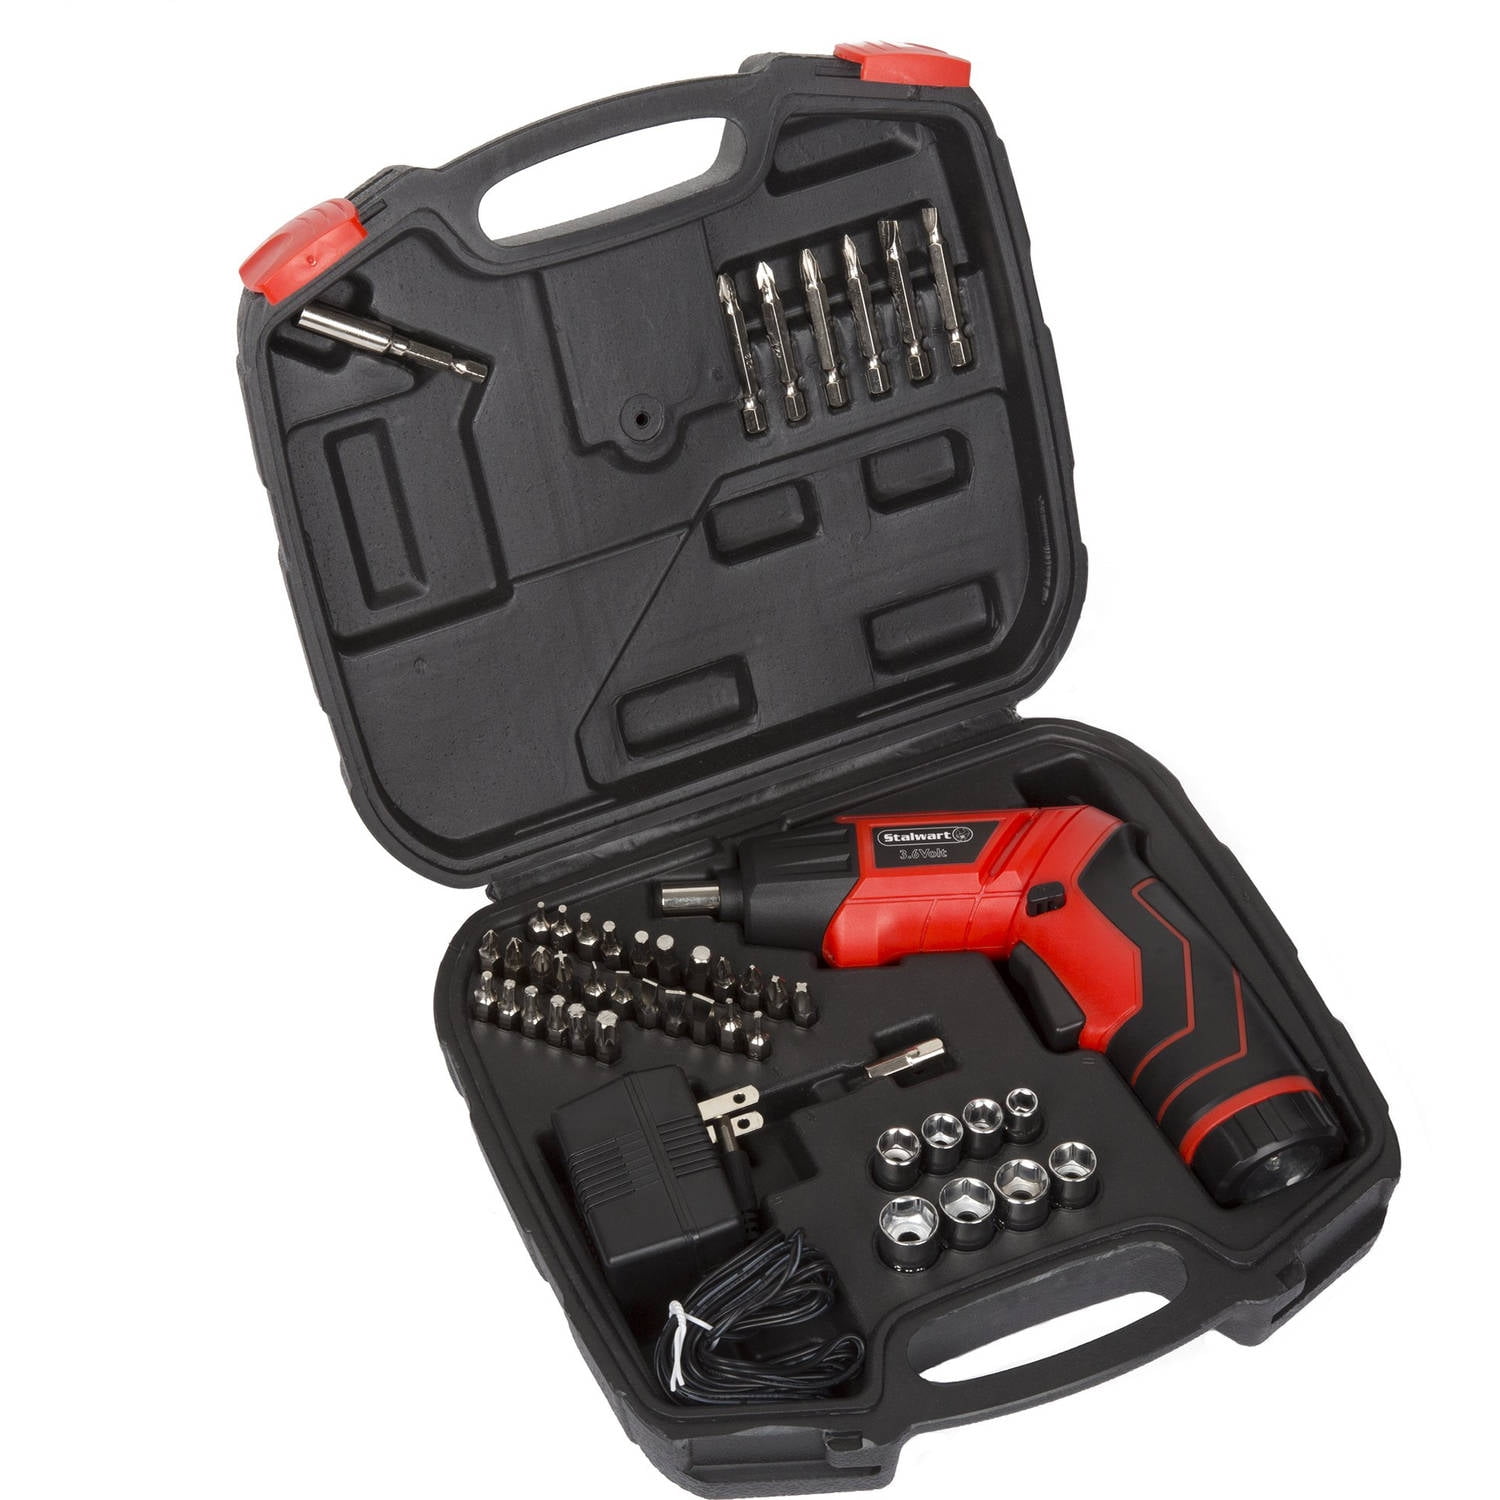 Stalwart 45 Piece 3.6V LED Rechargeable Pivoting Cordless Screwdriver Set